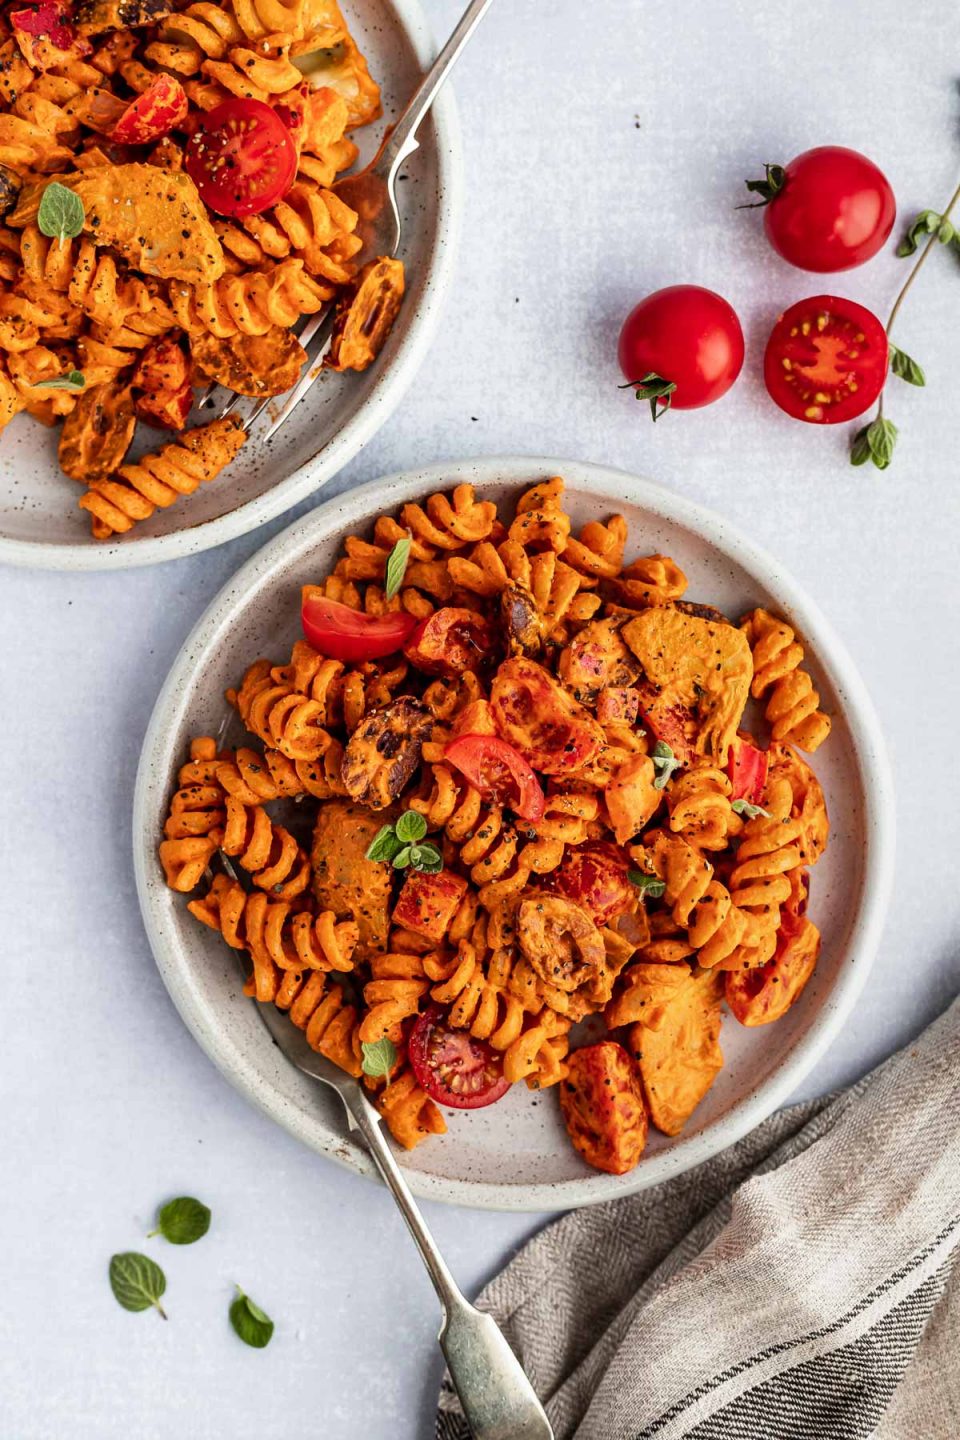 2 individual plates of creamy Italian pasta salad, sitting atop a light blue surface next to a striped linen napkin. The plates are surrounded by fresh oregano & red cherry tomatoes.